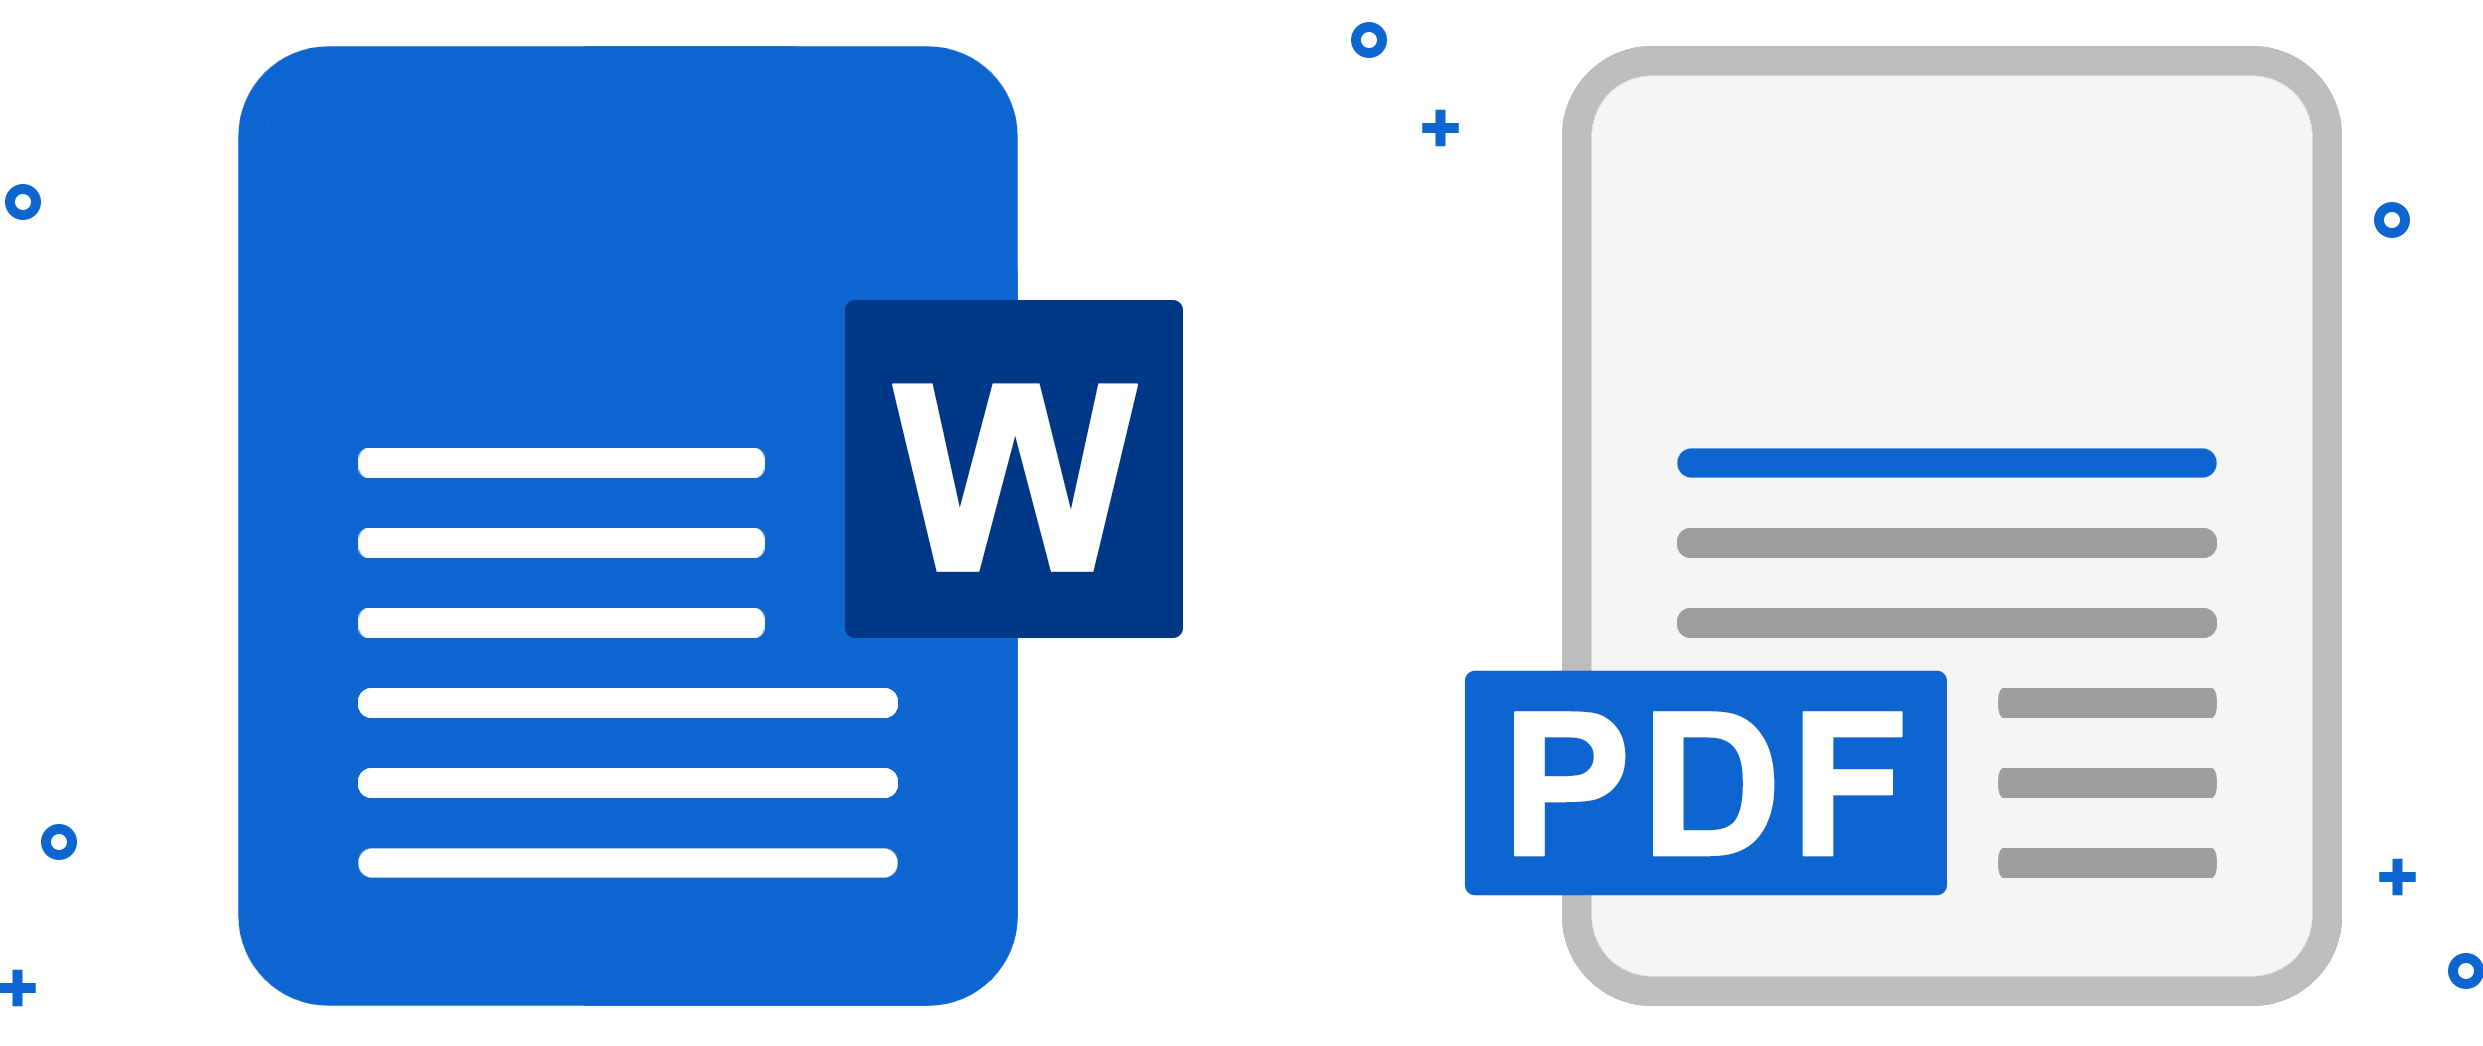 echo Spread ankle Word to PDF - Convert Word to PDF Online - 100% Free